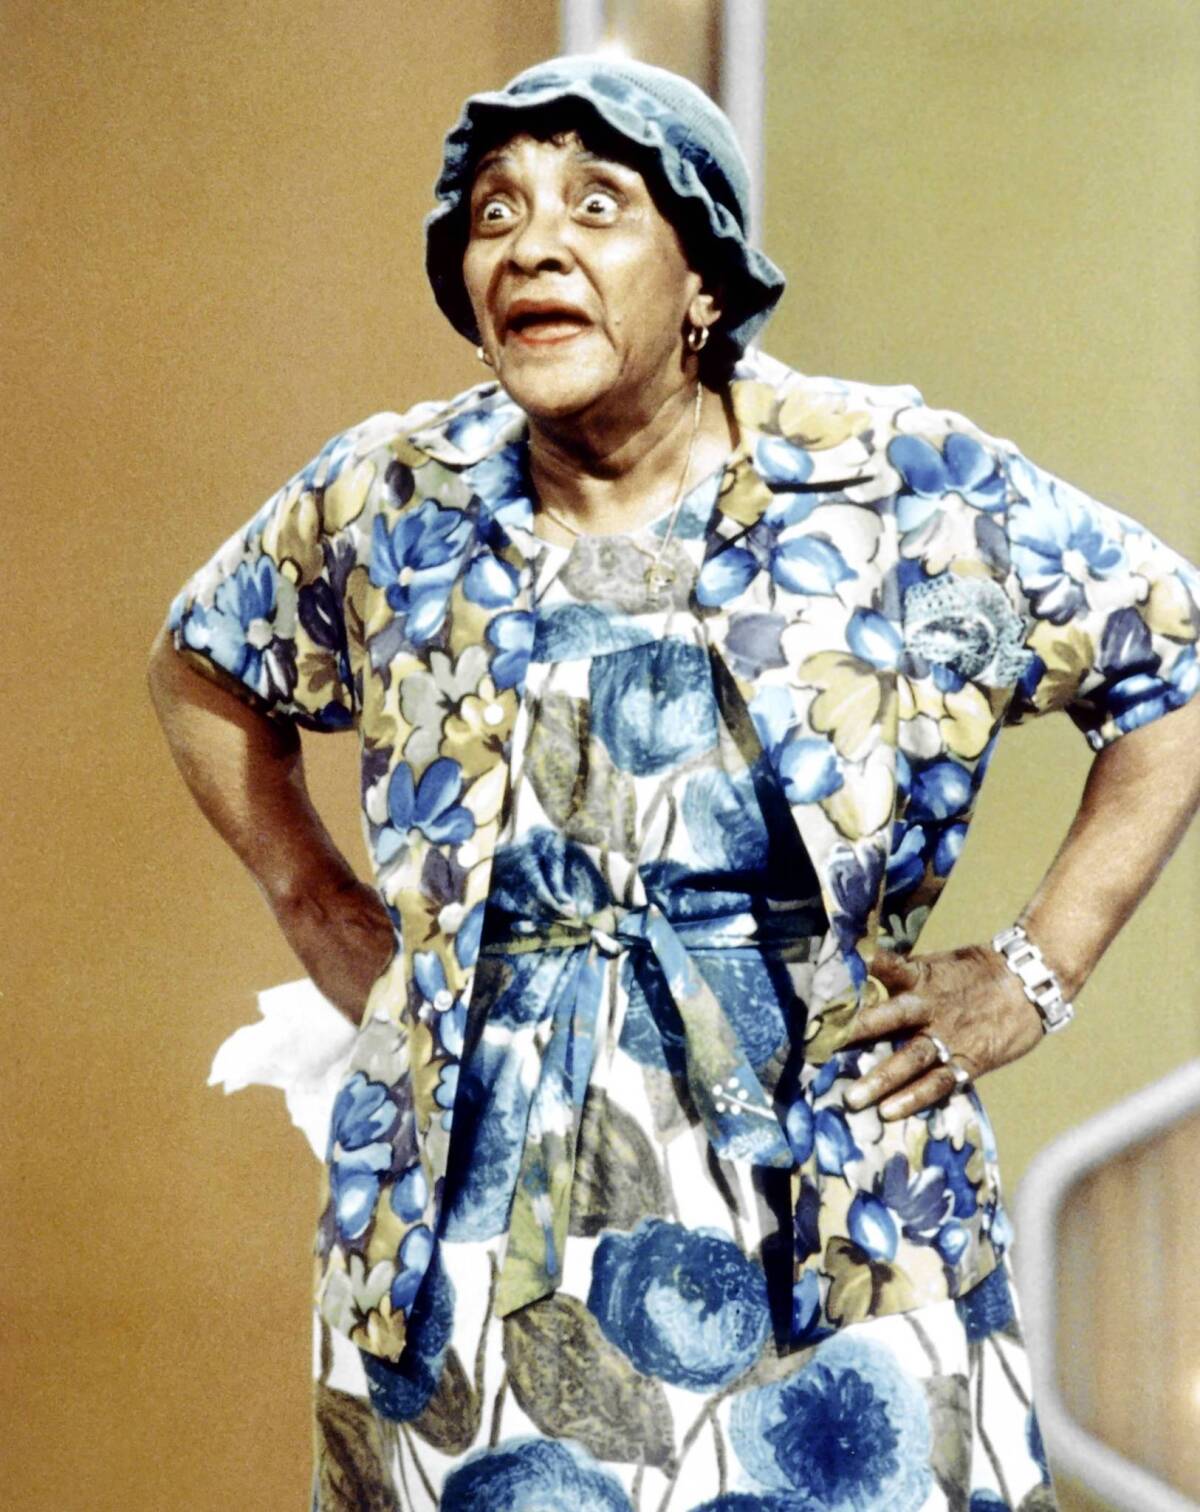 Moms Mabley is credited with influencing many comedians, including Eddie Murphy and Joan Rivers.